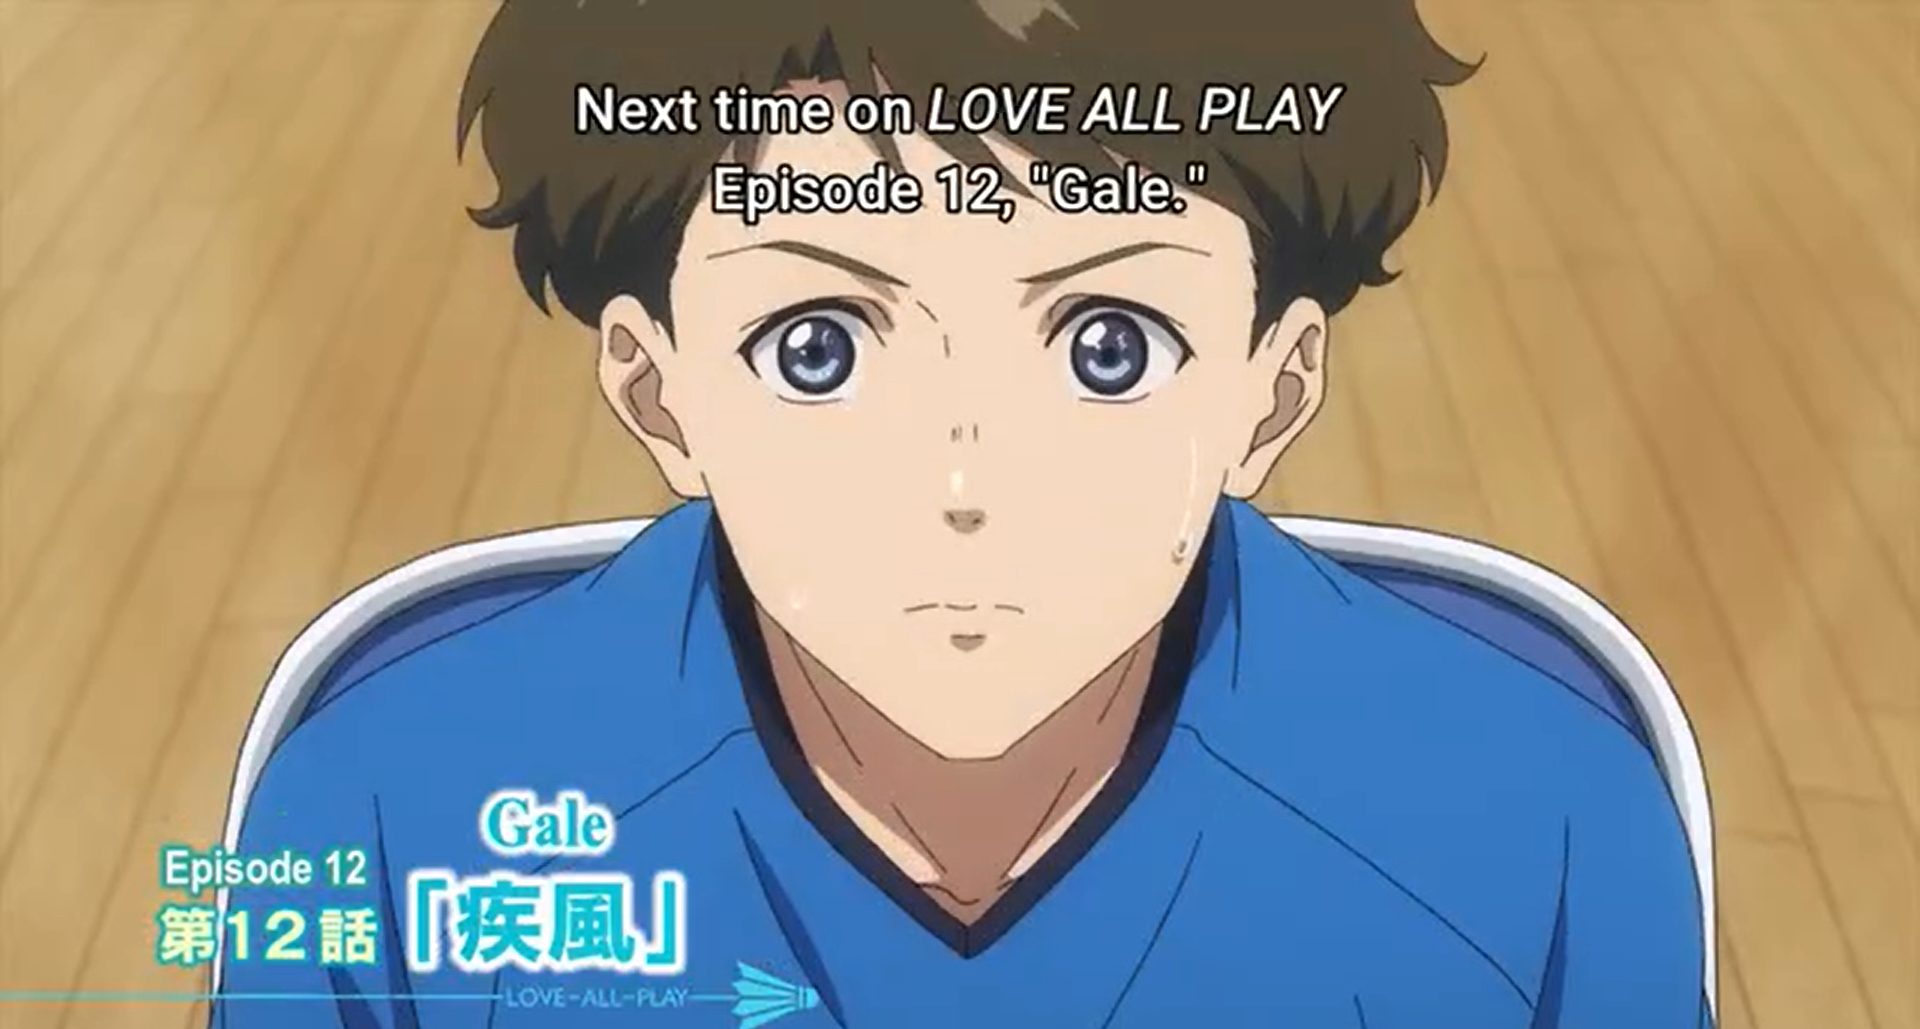 Love All Play Episode 12 Release Date